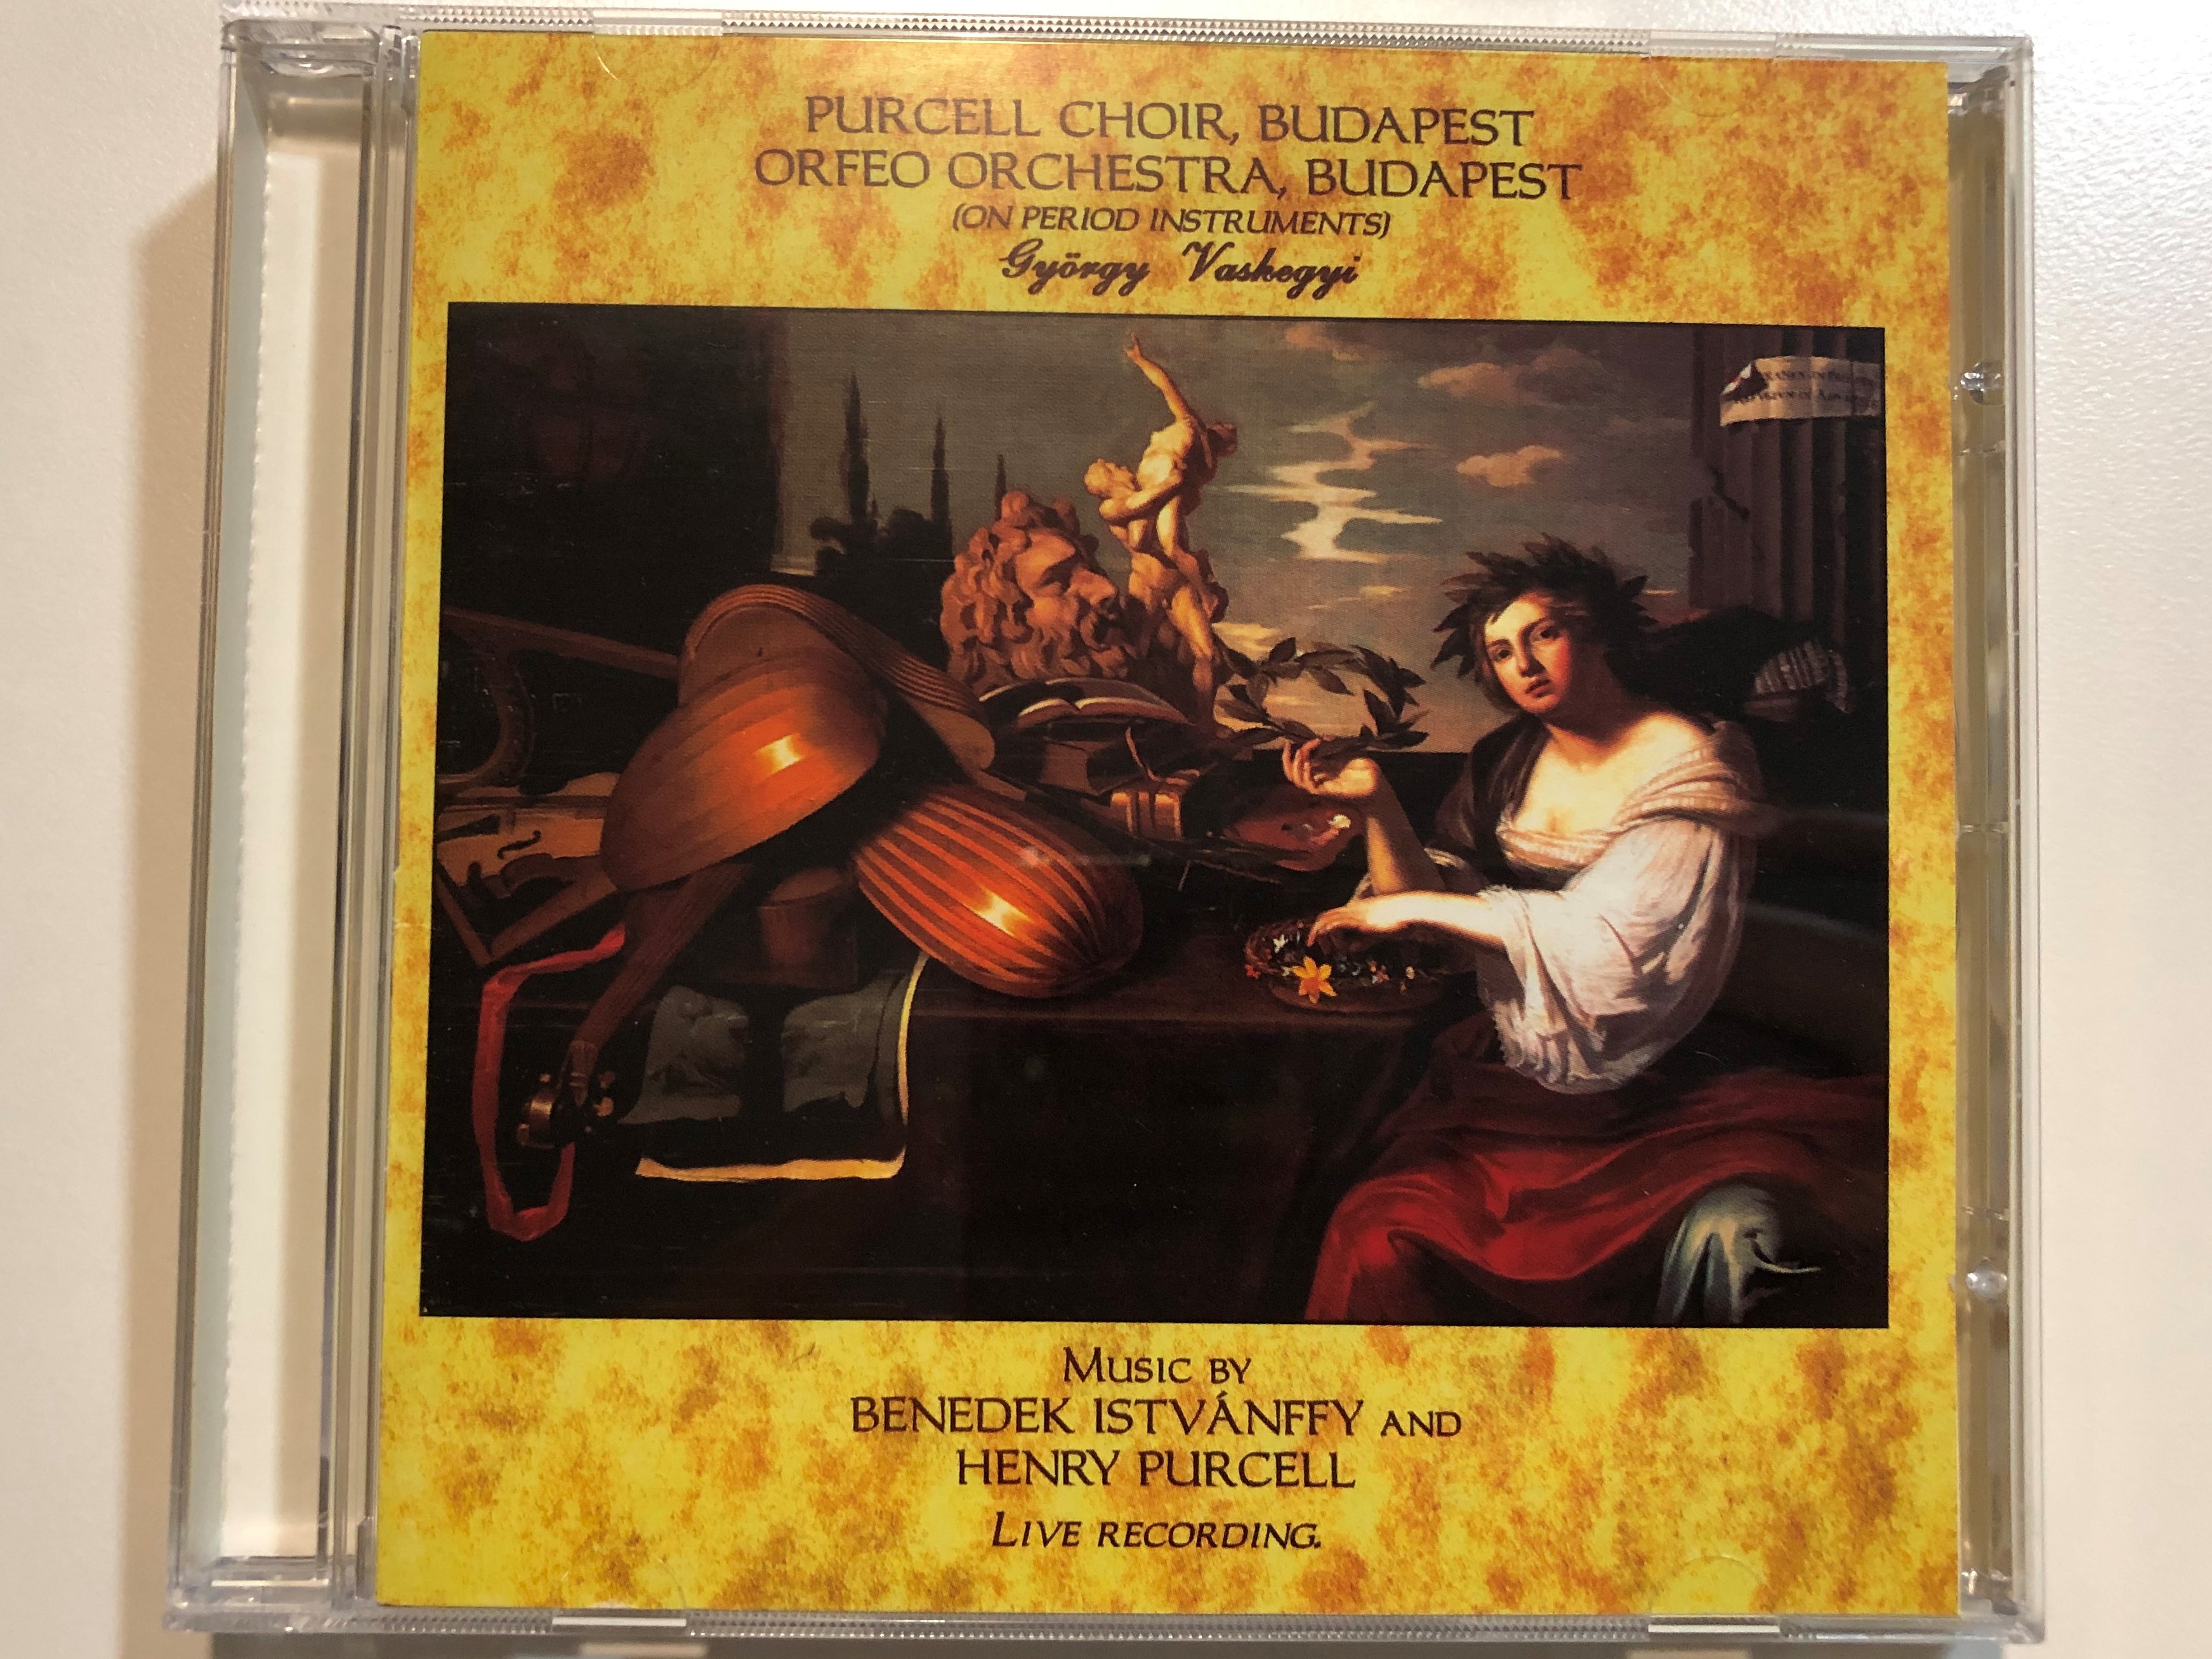 purcell-choir-budapest-orfeo-orchestra-budapest-on-period-instruments-gy-rgy-vashegyi-music-by-benedek-istv-nffy-and-henry-purcell-live-recording-orfeo-music-foundation-1997-audio-cd-199-1-.jpg